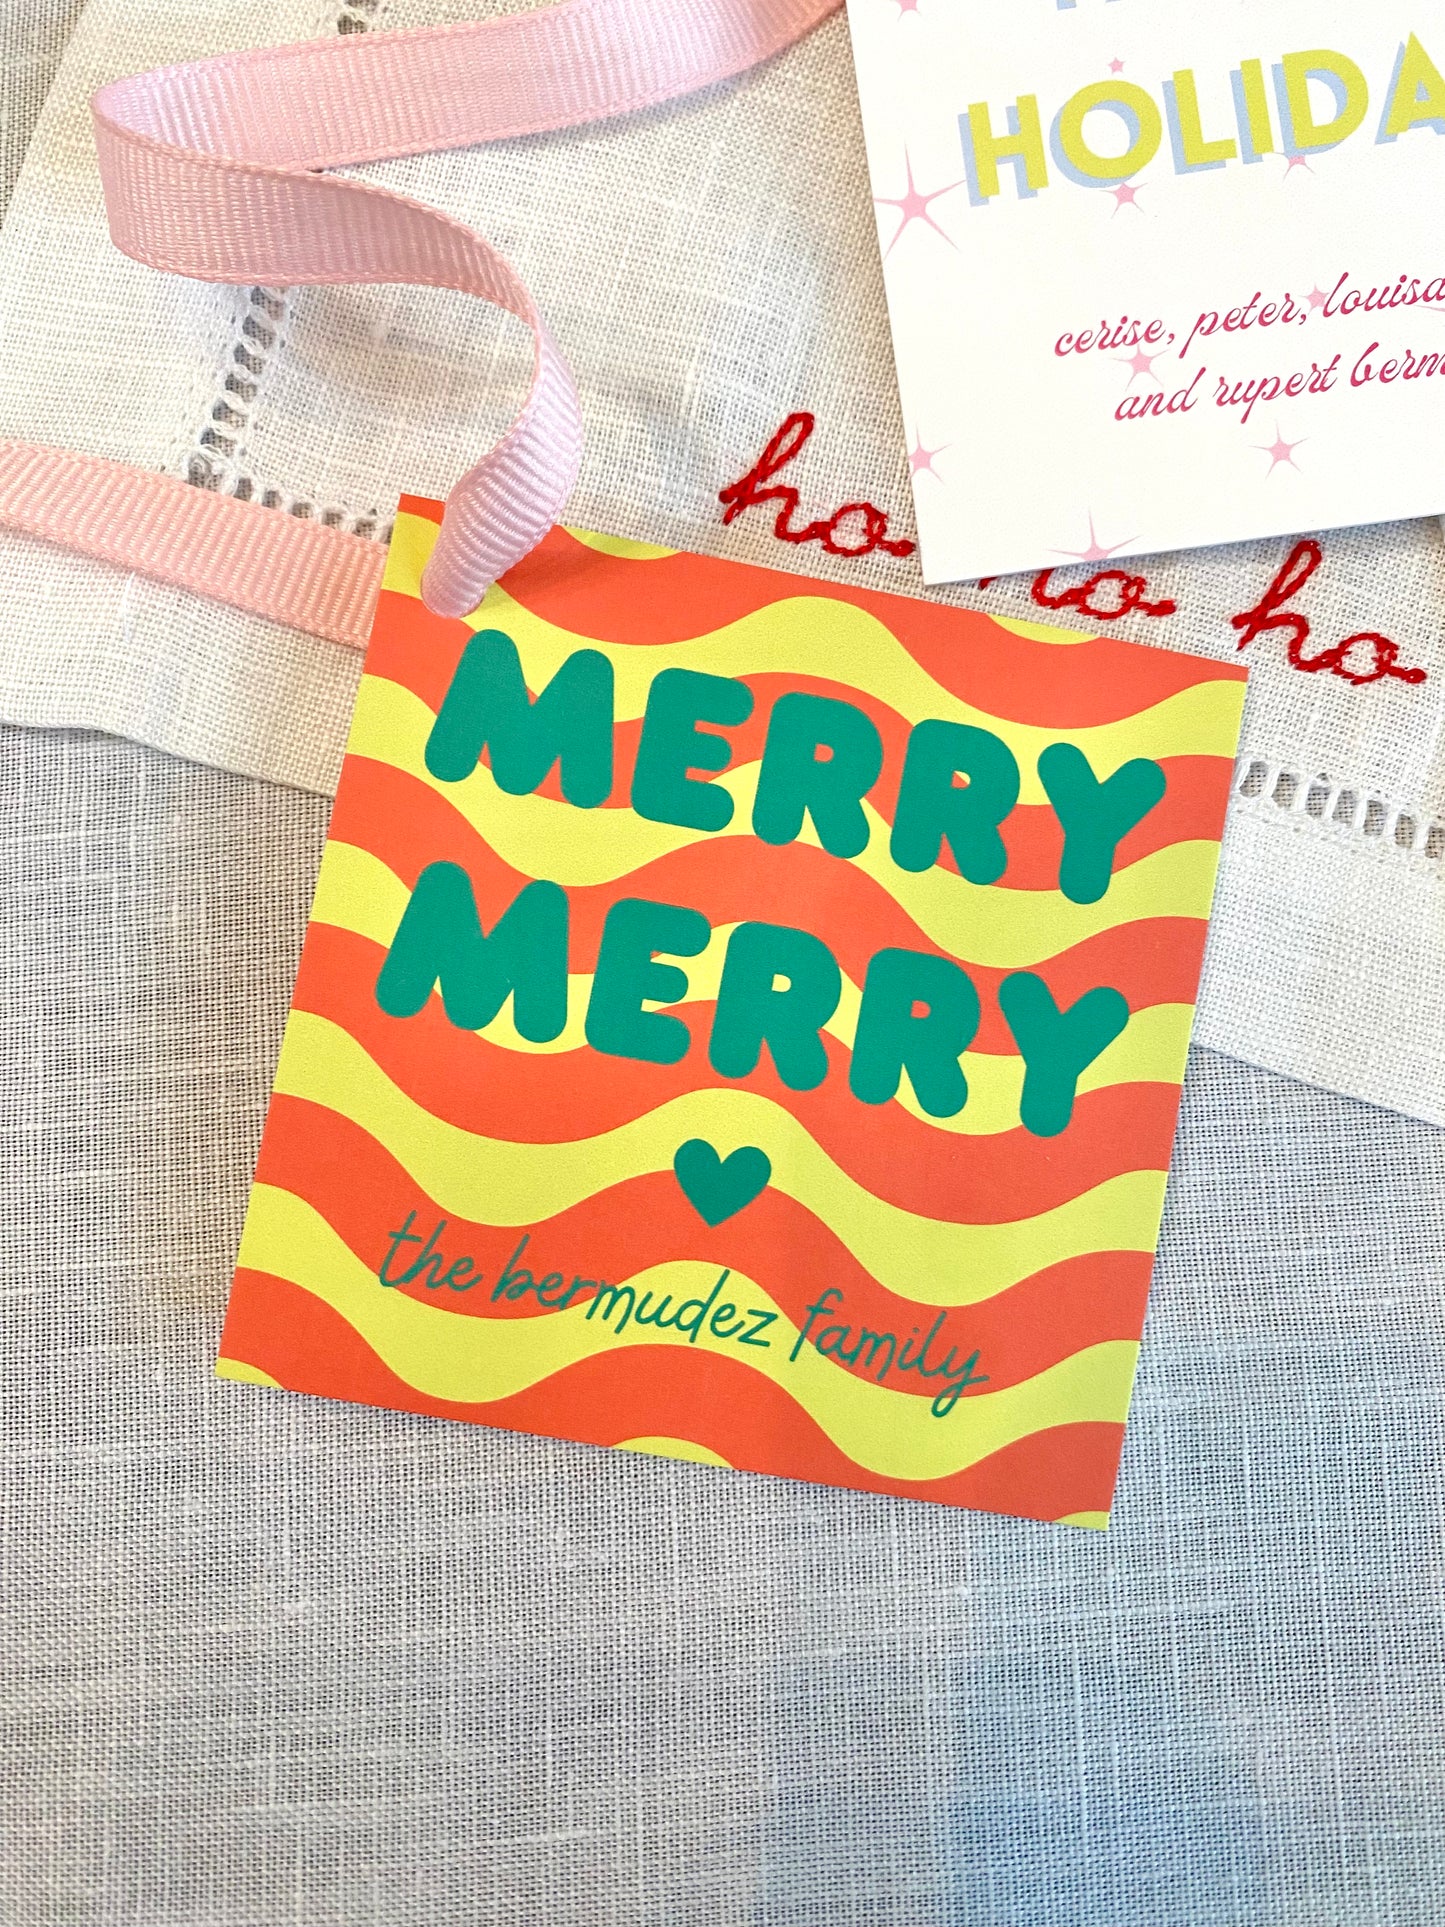 Stationery - Christmas Tags - Wavy Chartreuse Merry